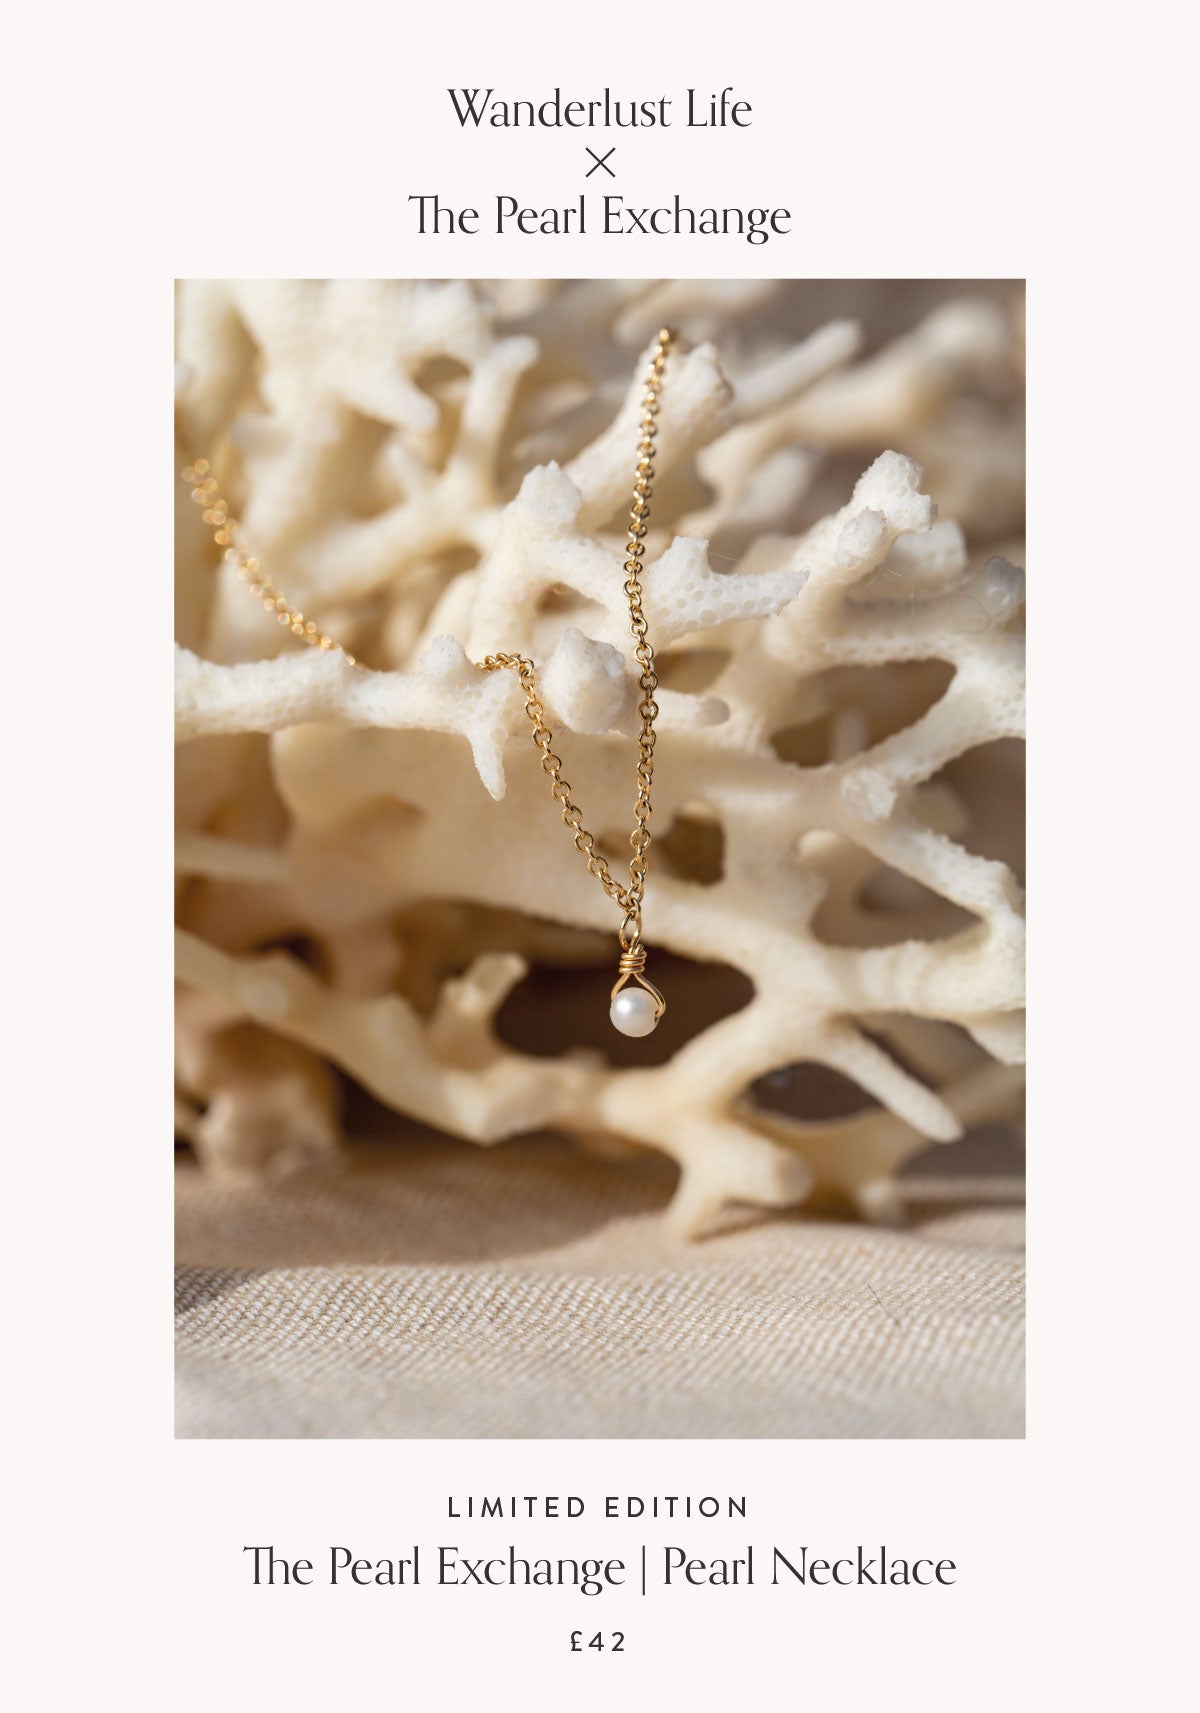 Wanderlust Life x The Pearl Exchange. Limited Edition Pearl Necklace.